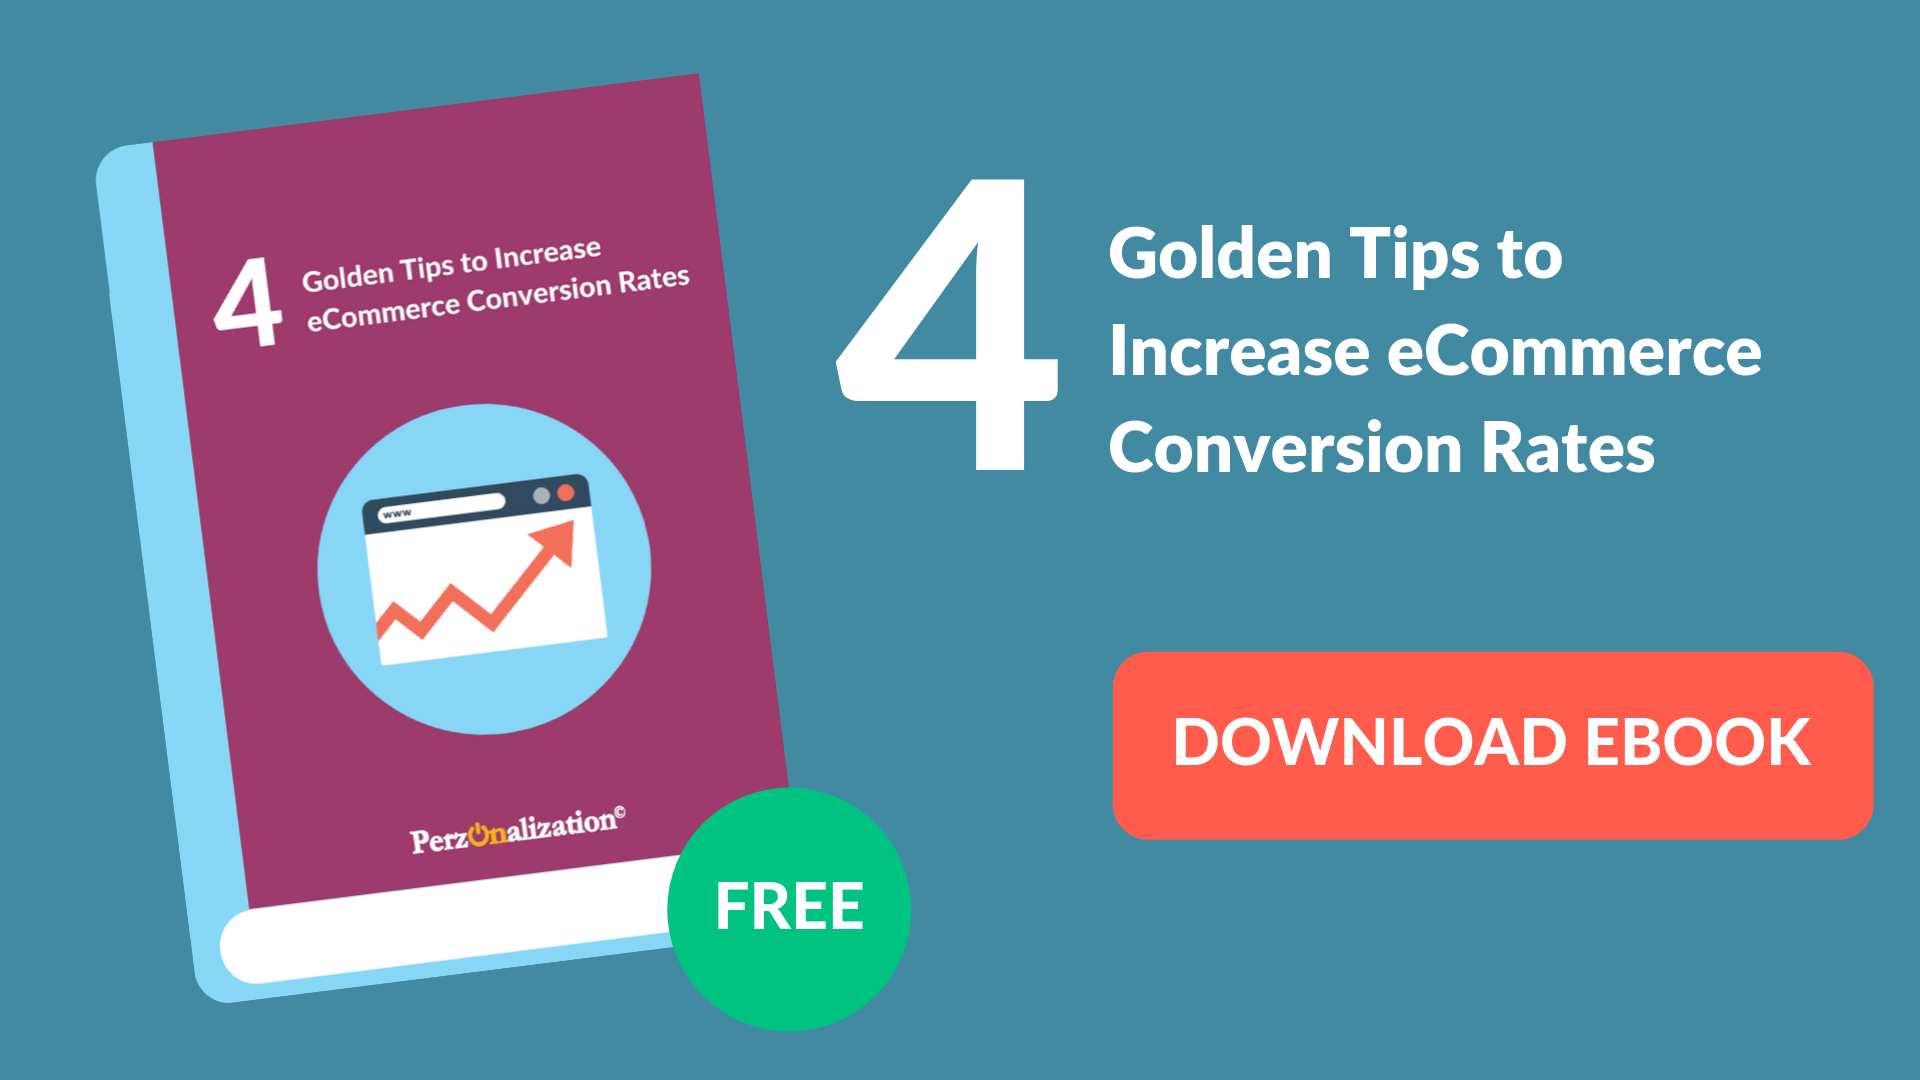 Download free eBook: Tips to increase eCommerce Conversion Rates